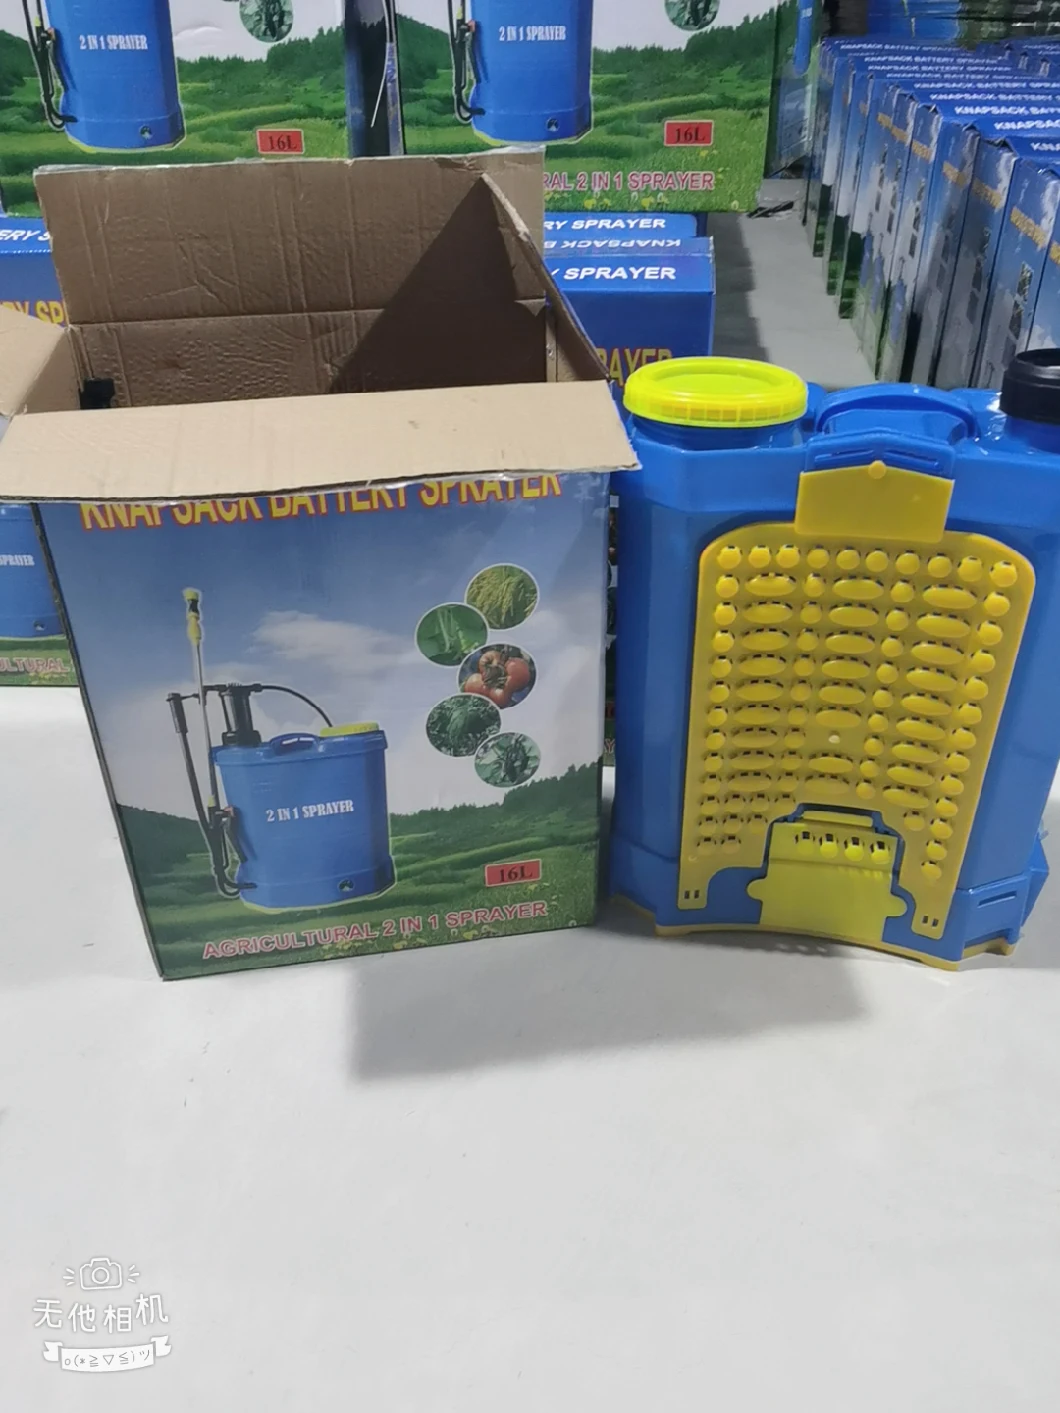 Taizhou Happy Farm Good Quality 16L/18L/20L Agricultural Knapsack/Backpack Battery Electric Type Pump 2 In1 Power Sprayer